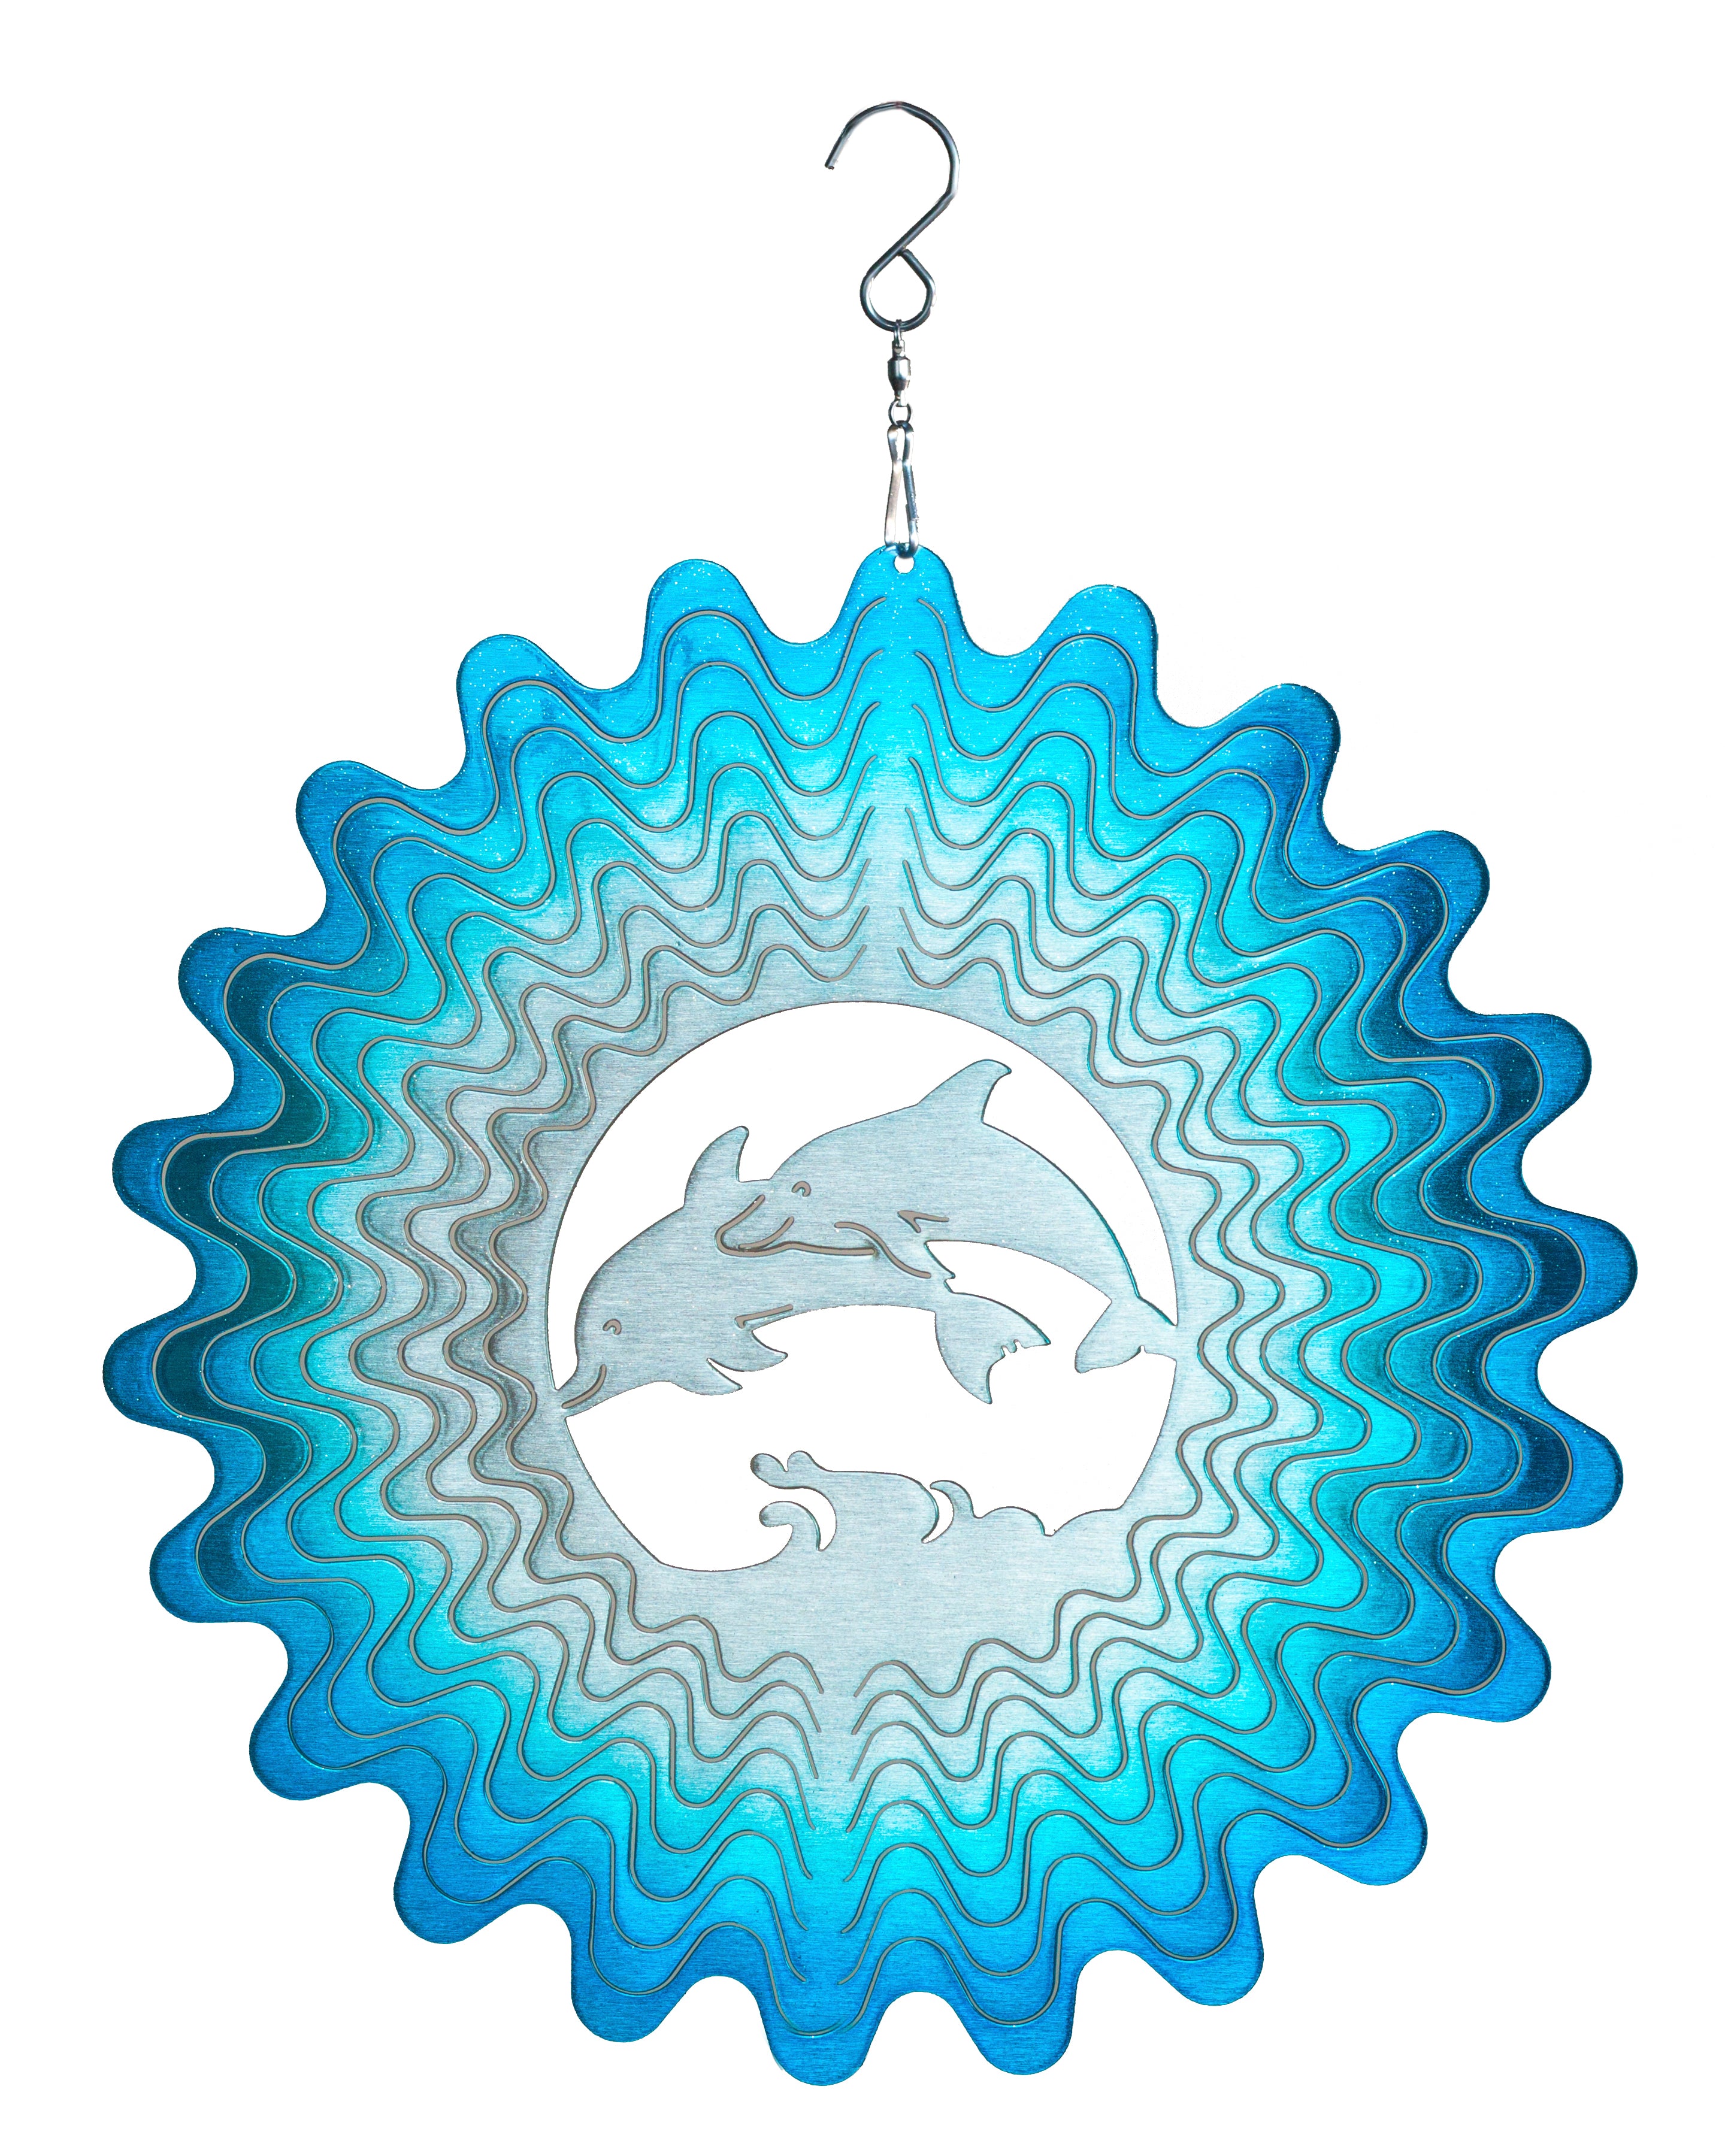 Dolphin Wind Spinner With Seashell Pendant Easy Installation